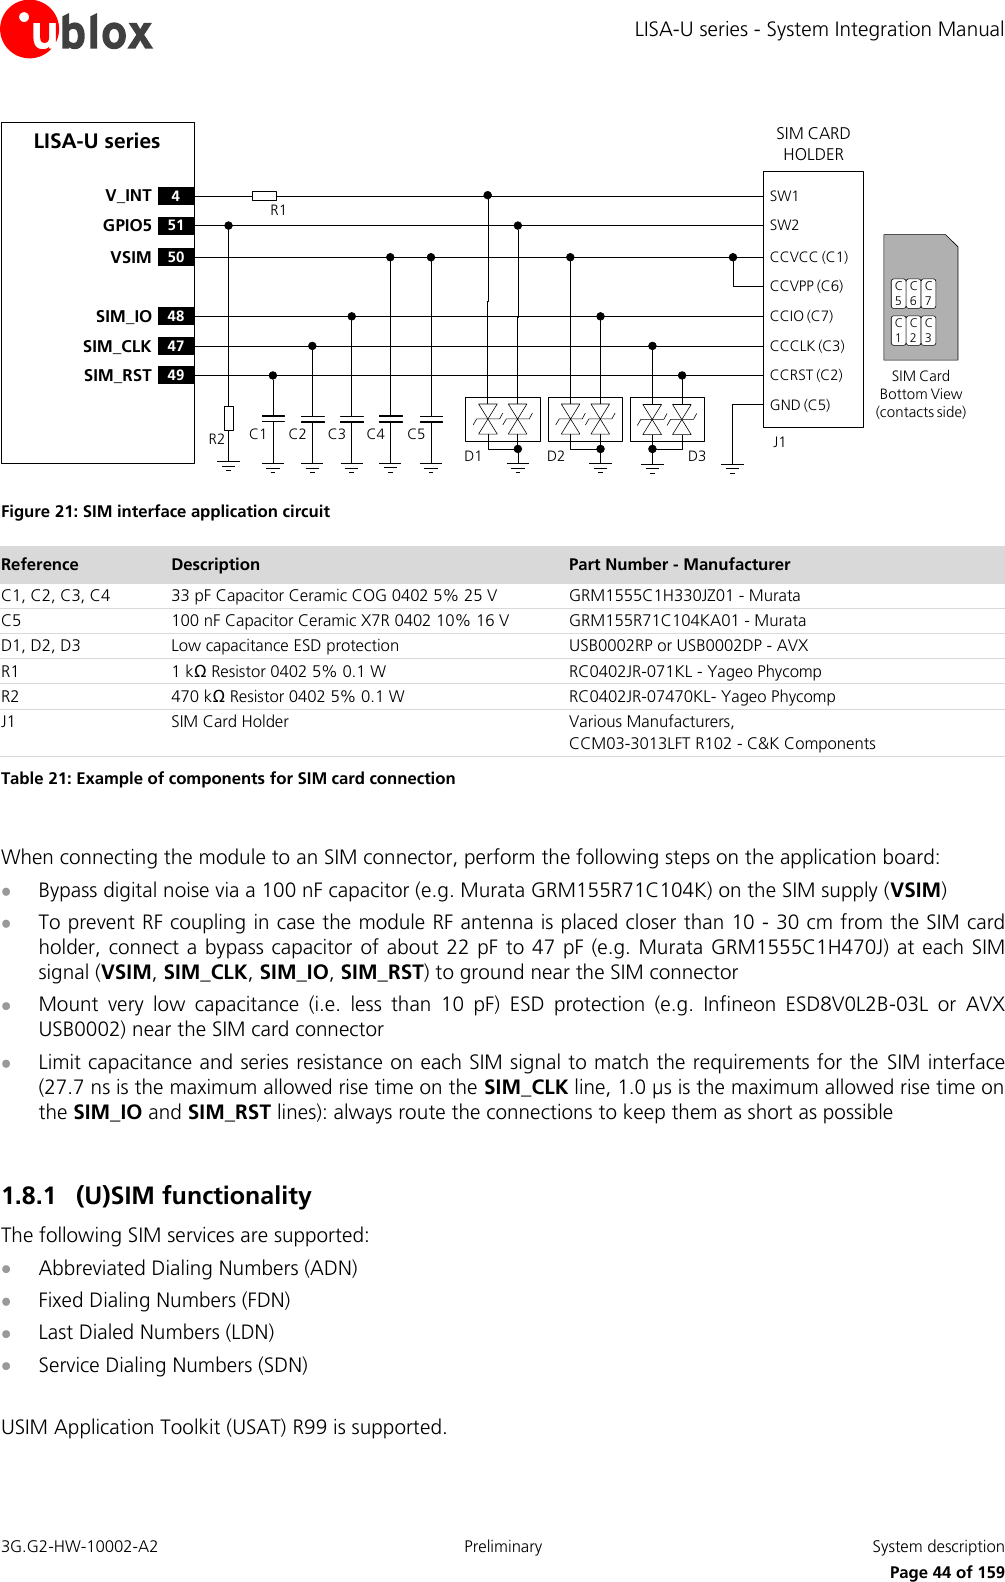 LISA-U series - System Integration Manual 3G.G2-HW-10002-A2  Preliminary  System description      Page 44 of 159 LISA-U seriesC1SIM CARD HOLDERCCVCC (C1)CCVPP (C6)CCIO (C7)CCCLK (C3)CCRST (C2)GND (C5)C2 C3 C5D2 D3C5C6C7C1C2C3SIM Card Bottom View (contacts side)J150VSIM48SIM_IO47SIM_CLK49SIM_RSTC4SW1SW24V_INT51GPIO5R2R1D1 Figure 21: SIM interface application circuit Reference Description Part Number - Manufacturer C1, C2, C3, C4 33 pF Capacitor Ceramic COG 0402 5% 25 V GRM1555C1H330JZ01 - Murata C5 100 nF Capacitor Ceramic X7R 0402 10% 16 V GRM155R71C104KA01 - Murata D1, D2, D3 Low capacitance ESD protection USB0002RP or USB0002DP - AVX R1 1 kΩ Resistor 0402 5% 0.1 W RC0402JR-071KL - Yageo Phycomp R2 470 kΩ Resistor 0402 5% 0.1 W RC0402JR-07470KL- Yageo Phycomp J1 SIM Card Holder Various Manufacturers, CCM03-3013LFT R102 - C&amp;K Components Table 21: Example of components for SIM card connection  When connecting the module to an SIM connector, perform the following steps on the application board:  Bypass digital noise via a 100 nF capacitor (e.g. Murata GRM155R71C104K) on the SIM supply (VSIM)  To prevent RF coupling in case the module RF antenna is placed closer than 10 - 30 cm from the SIM card holder, connect a bypass capacitor of about 22 pF to 47 pF (e.g. Murata GRM1555C1H470J)  at each SIM signal (VSIM, SIM_CLK, SIM_IO, SIM_RST) to ground near the SIM connector  Mount  very  low  capacitance  (i.e.  less  than  10  pF)  ESD  protection  (e.g.  Infineon  ESD8V0L2B-03L  or  AVX USB0002) near the SIM card connector  Limit capacitance and series resistance on each SIM signal to match the requirements for the  SIM interface (27.7 ns is the maximum allowed rise time on the SIM_CLK line, 1.0 µs is the maximum allowed rise time on the SIM_IO and SIM_RST lines): always route the connections to keep them as short as possible  1.8.1 (U)SIM functionality The following SIM services are supported:  Abbreviated Dialing Numbers (ADN)  Fixed Dialing Numbers (FDN)  Last Dialed Numbers (LDN)  Service Dialing Numbers (SDN)  USIM Application Toolkit (USAT) R99 is supported.  